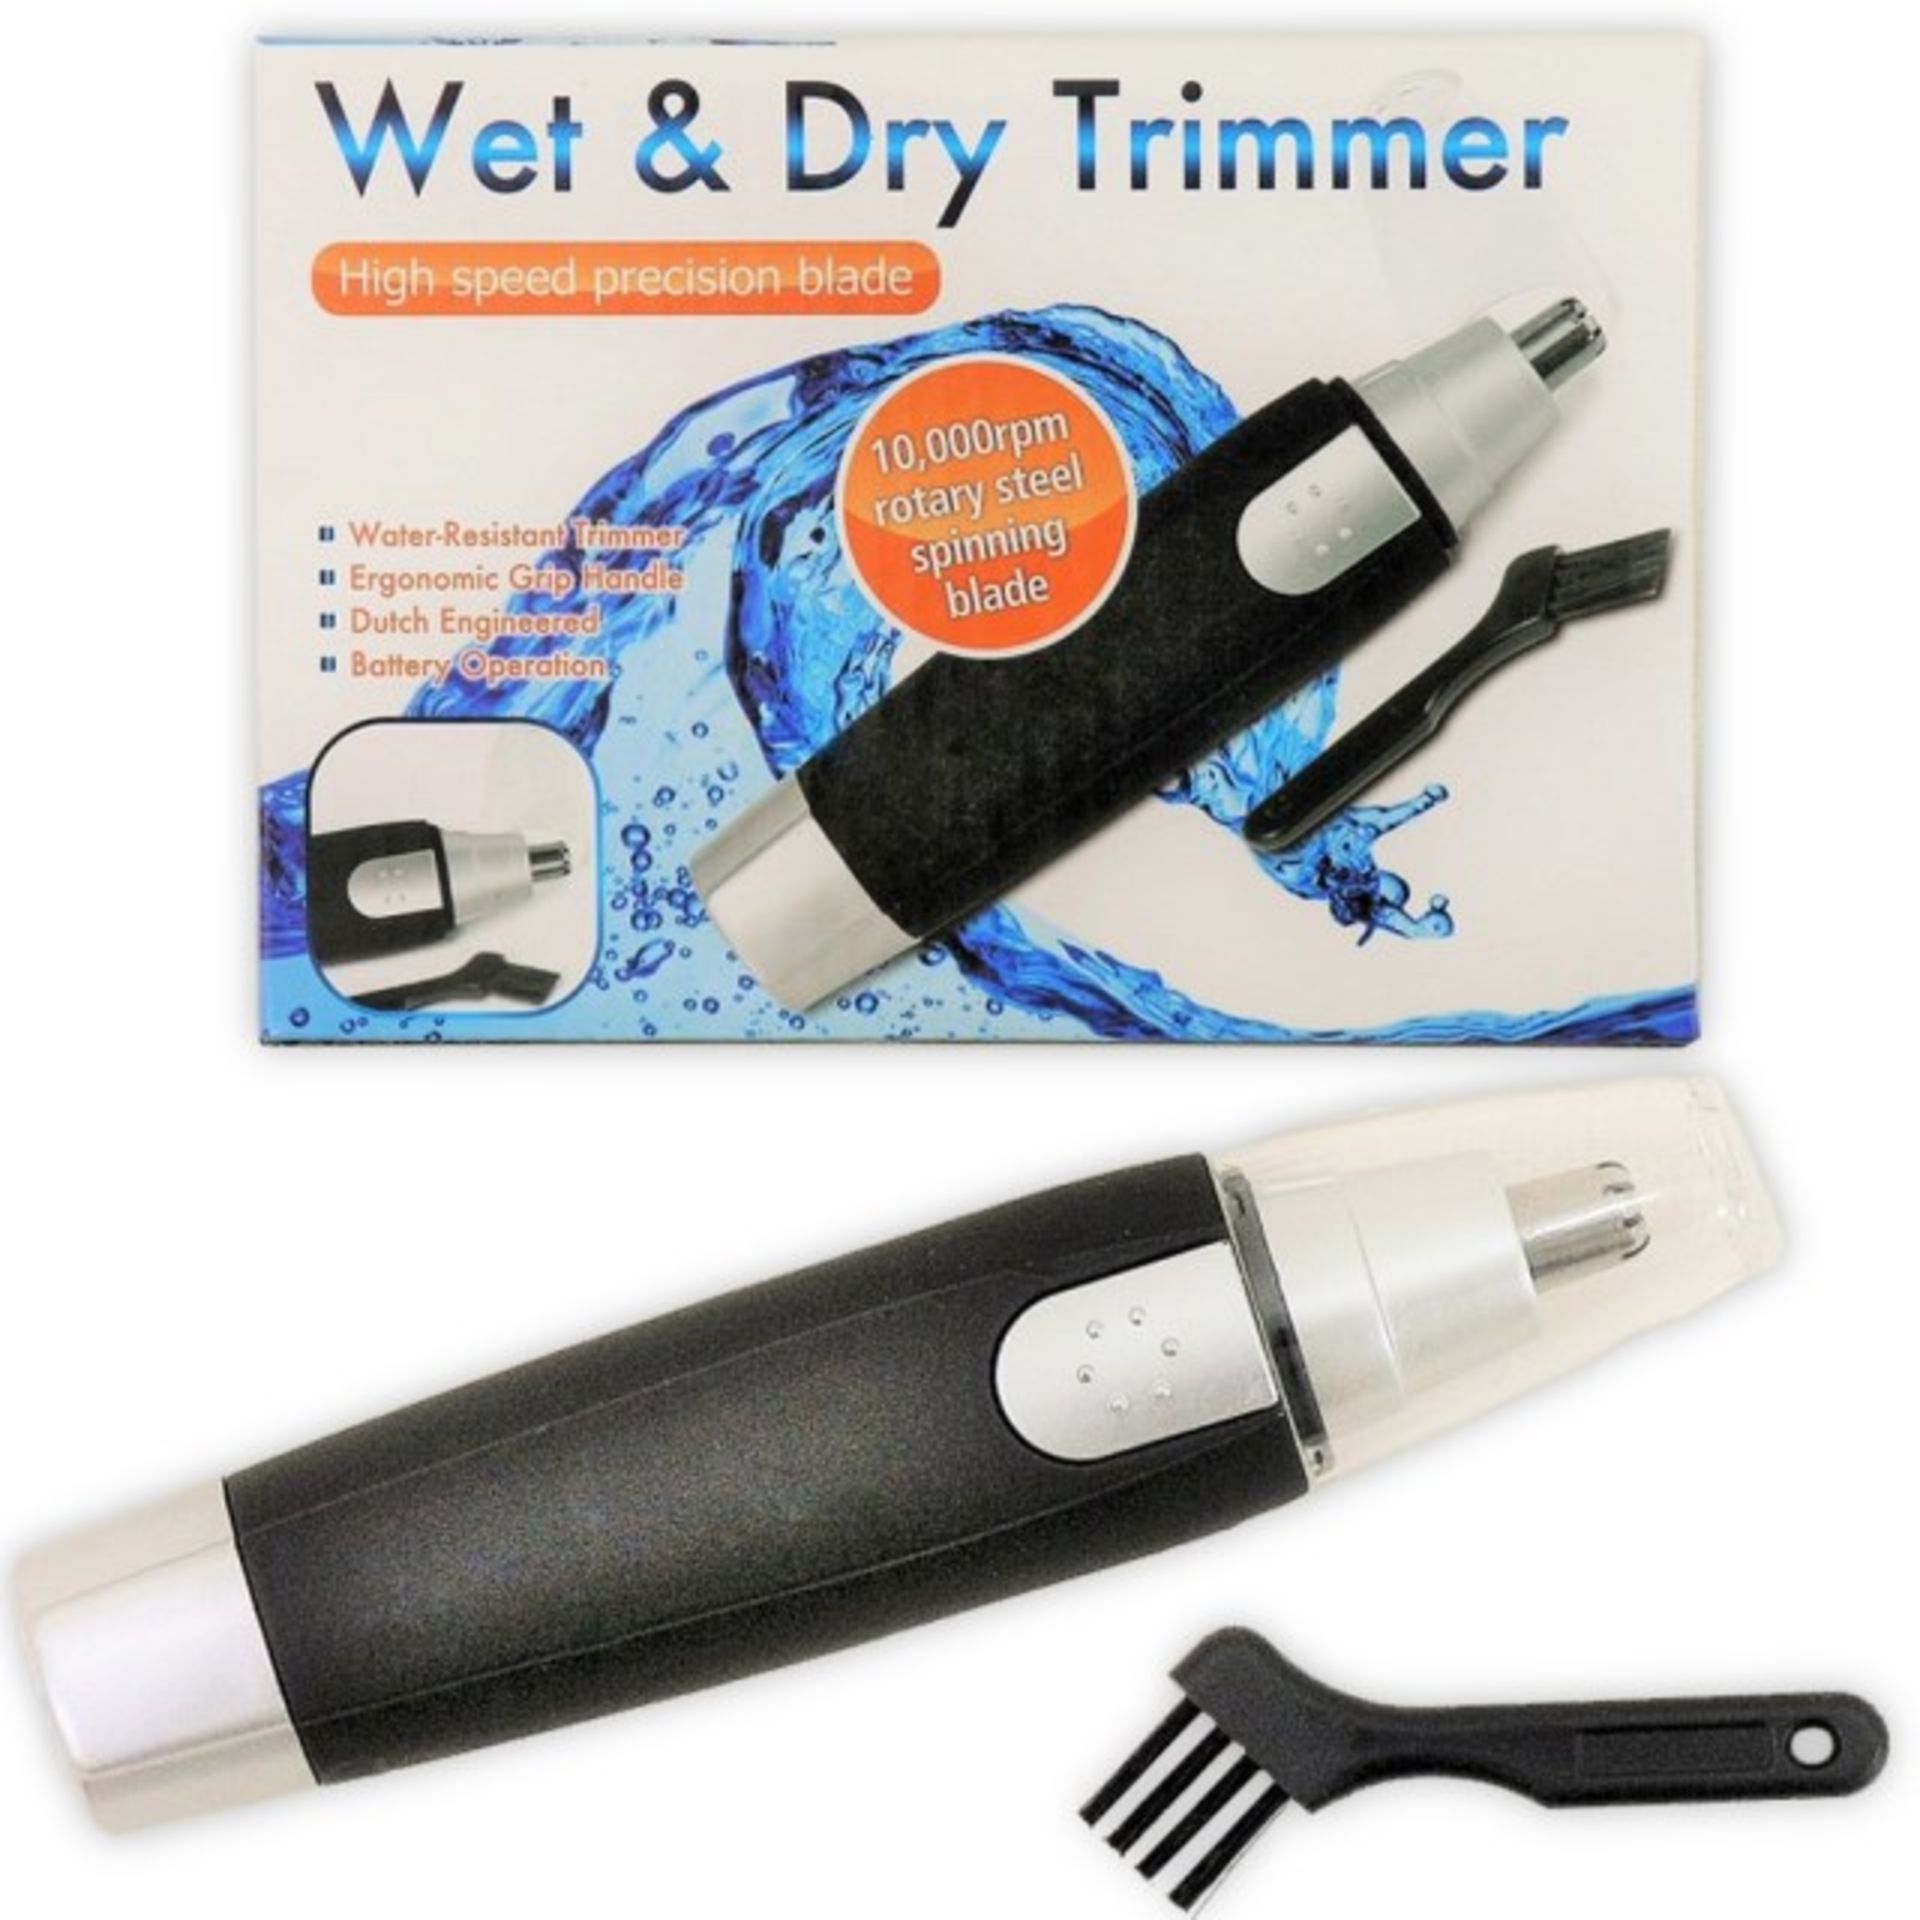 V Brand New Wet & Dry Trimmer With Ergonomic Handle - Water Resistant - Dutch Engineered